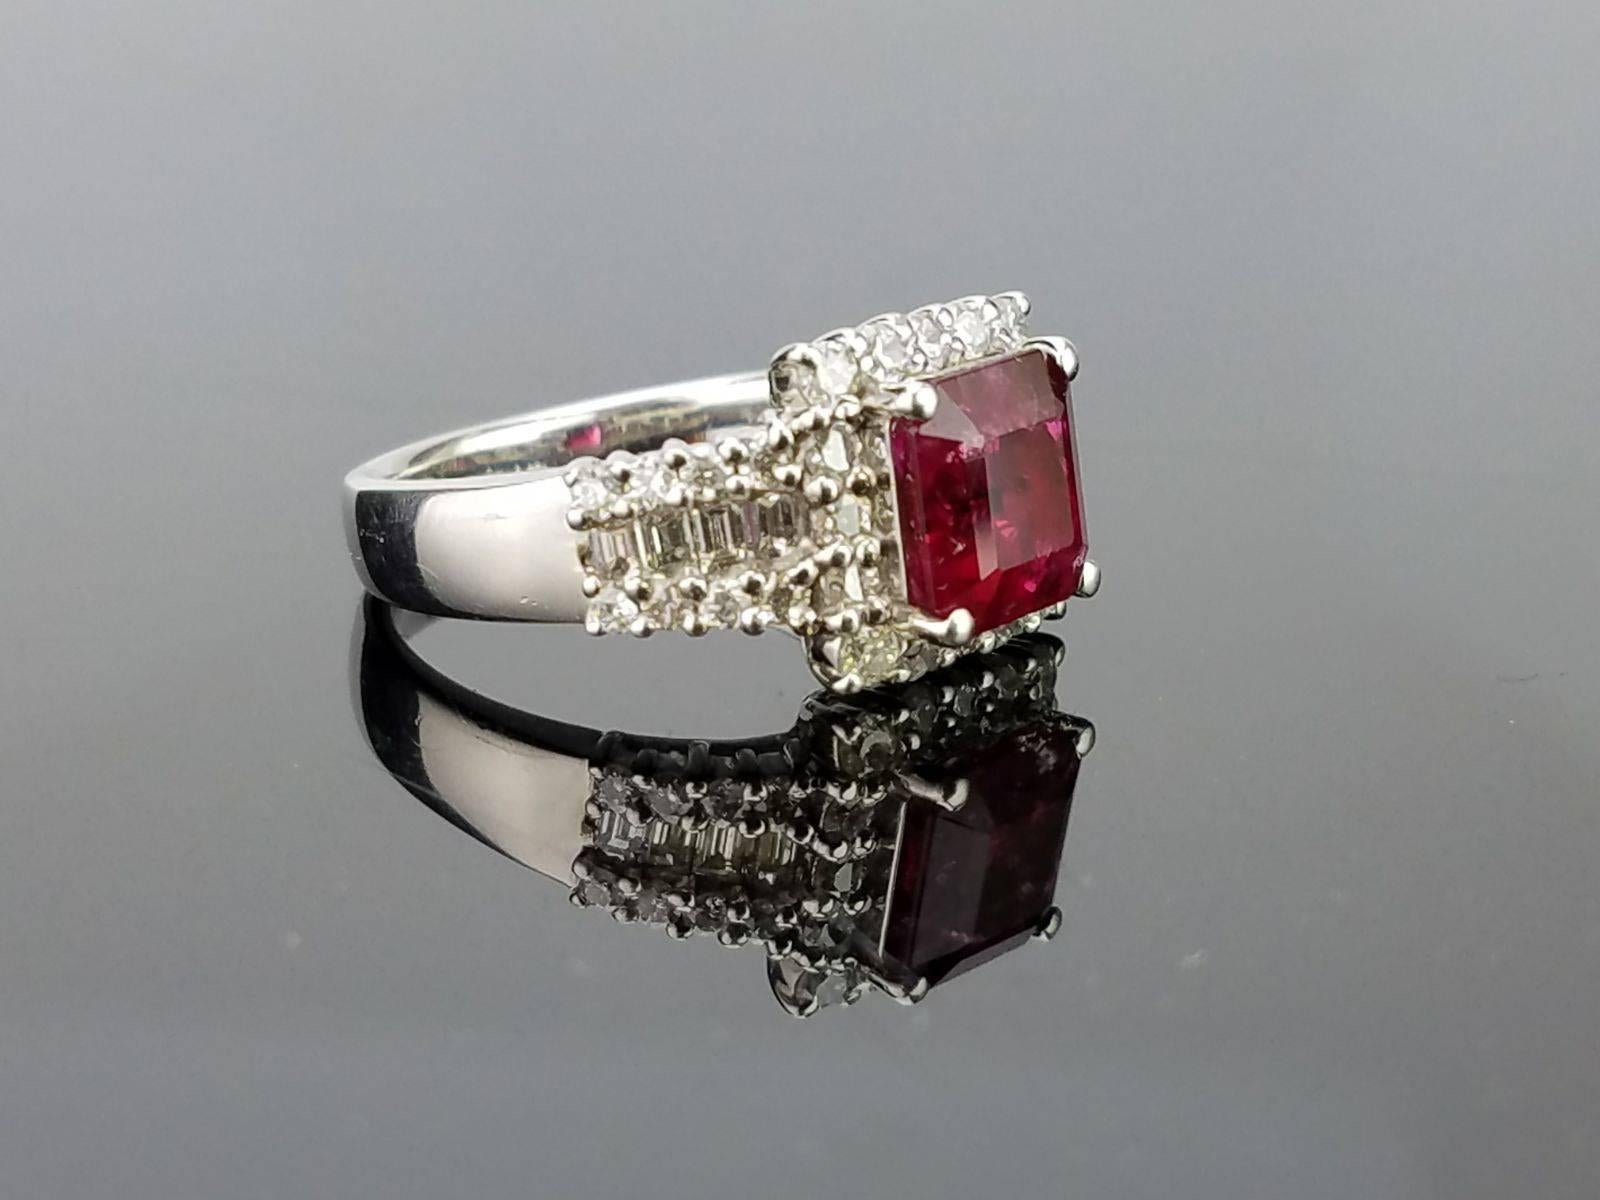 Considered one of the worlds rarest gemstones, an investment piece of extremely rare 1.61 carat red emerald (red beryl) of great lustre, and colour set in platinum with diamonds sorrounding it. 

Stone Details:
Stone: Red Emerald (Red Beryl)
Cut: